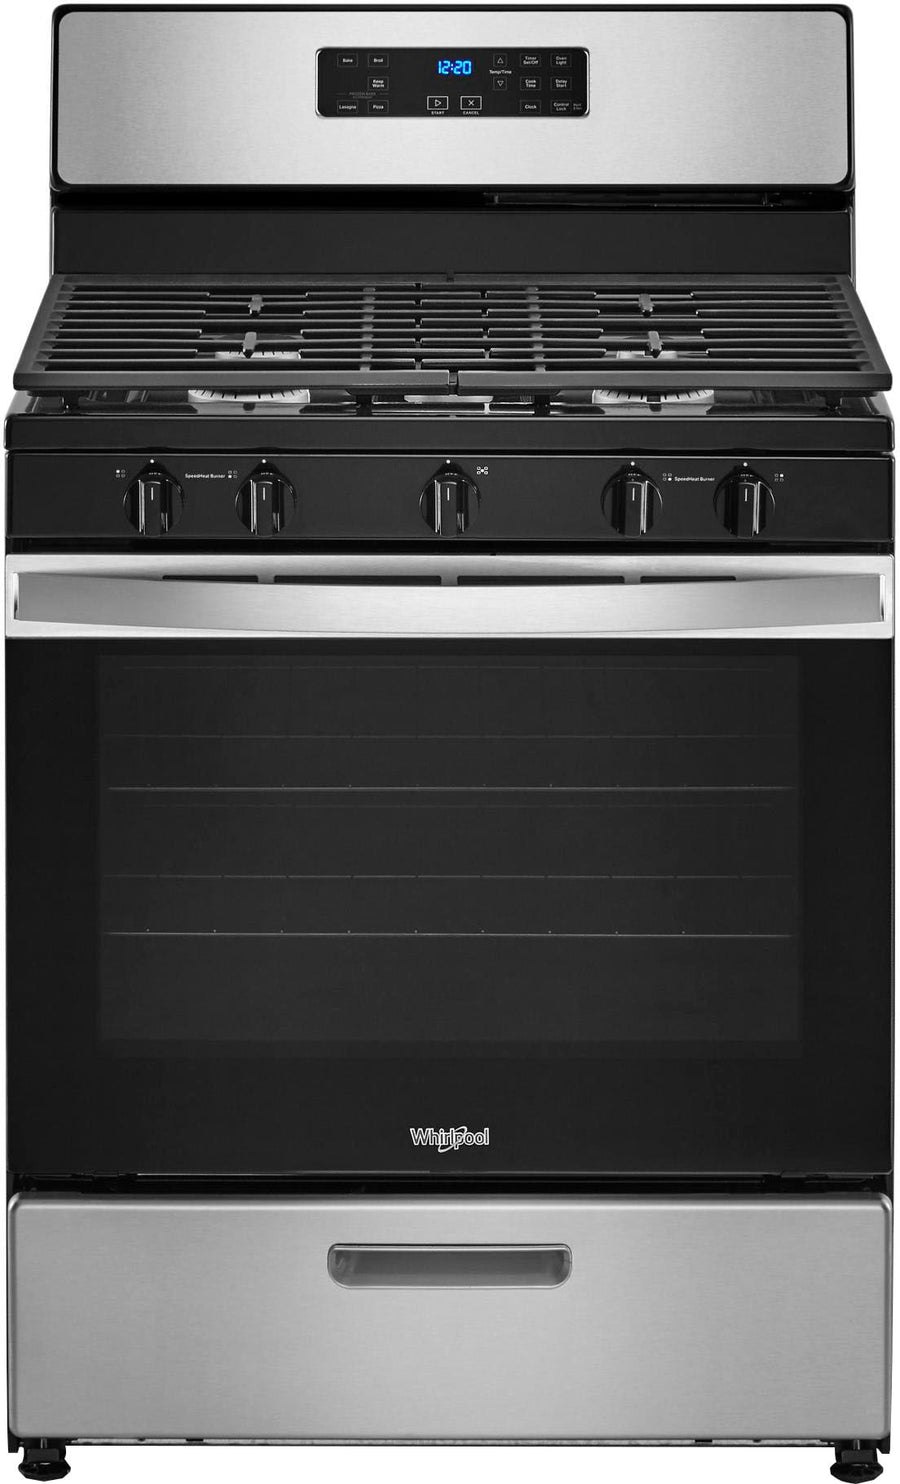 Whirlpool - 5.1 Cu. Ft. Freestanding Gas Range with Edge to Edge Cooktop - Stainless steel_0